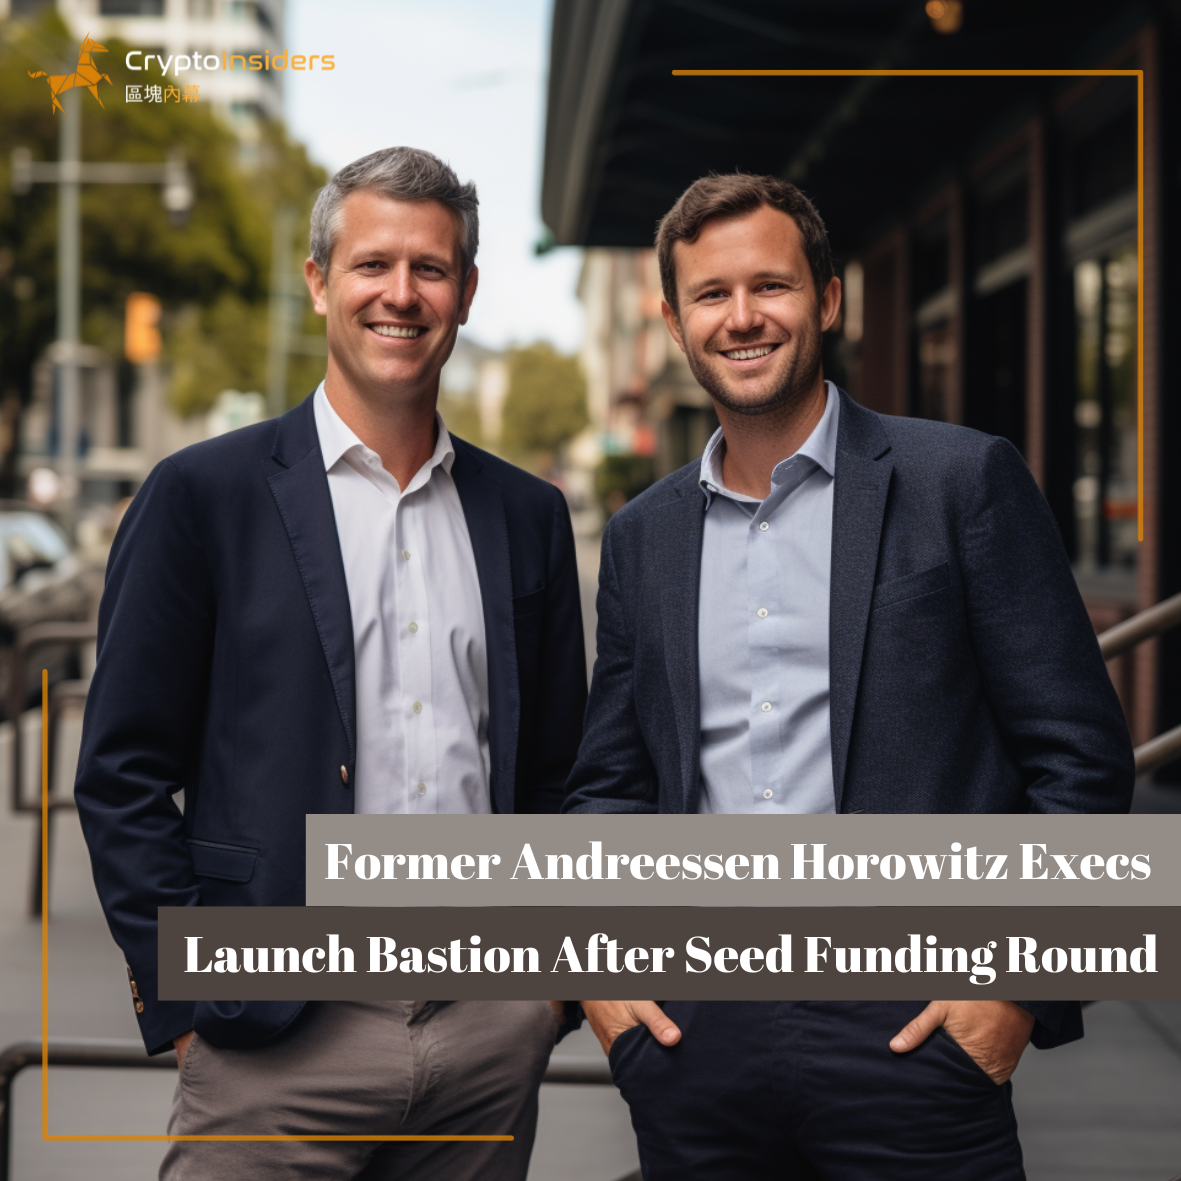 Former-Andreessen-Horowitz-Execs-Launch-Bastion-After-Seed-Funding-Round-Crypto-Insiders-Hong-Kong-Blockchain-News